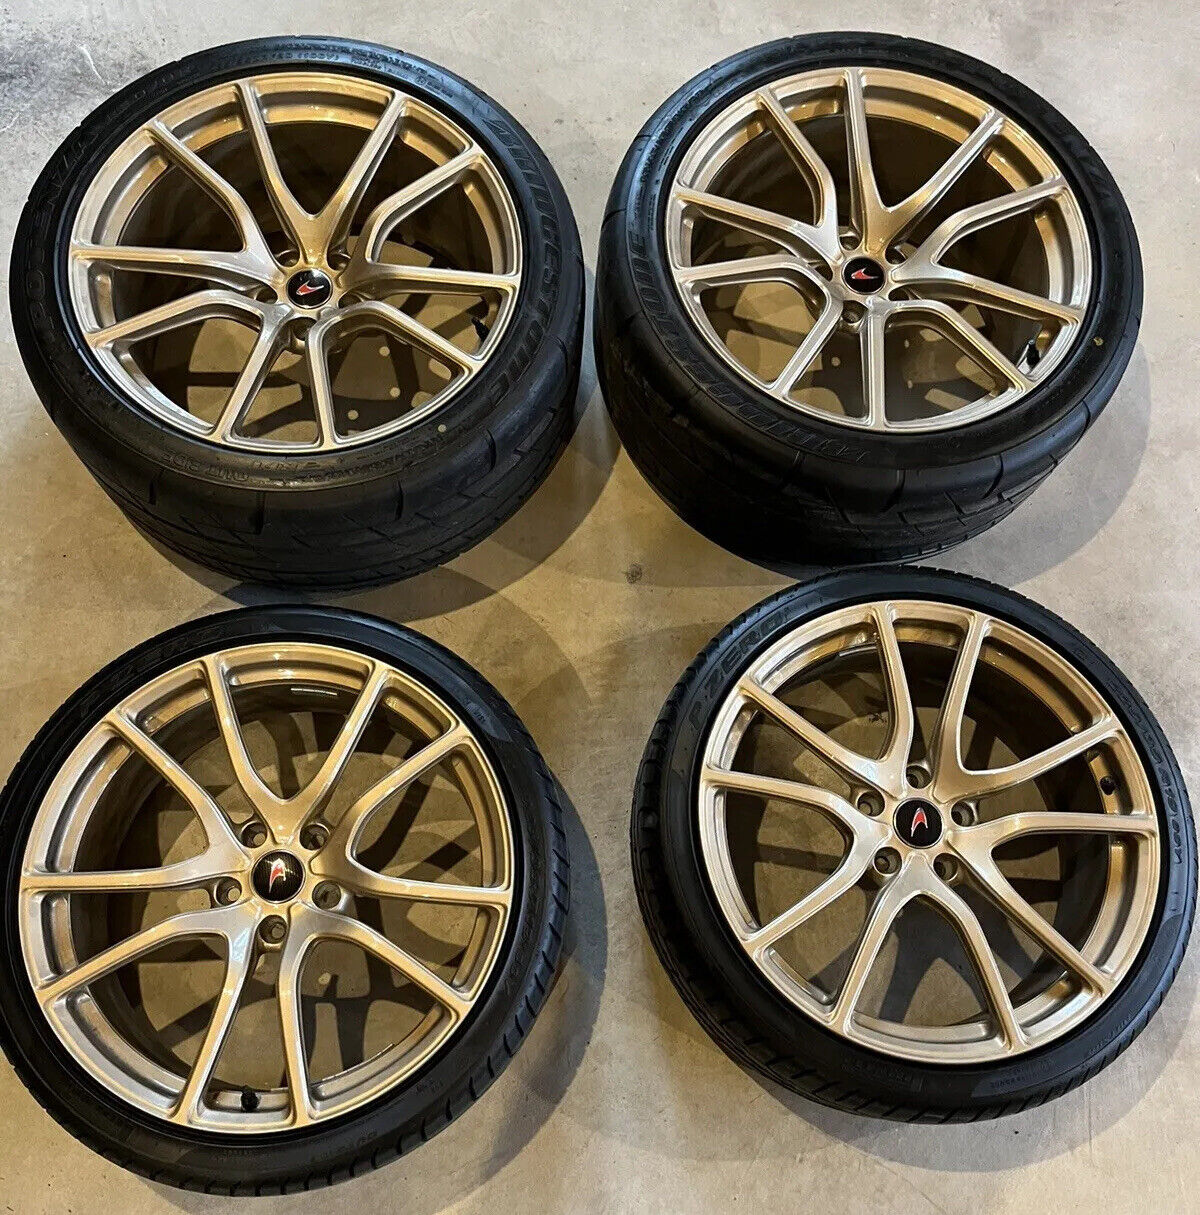 McLaren 570s Wheels And Tires OEM Genuine Set W TPMs And New Tires